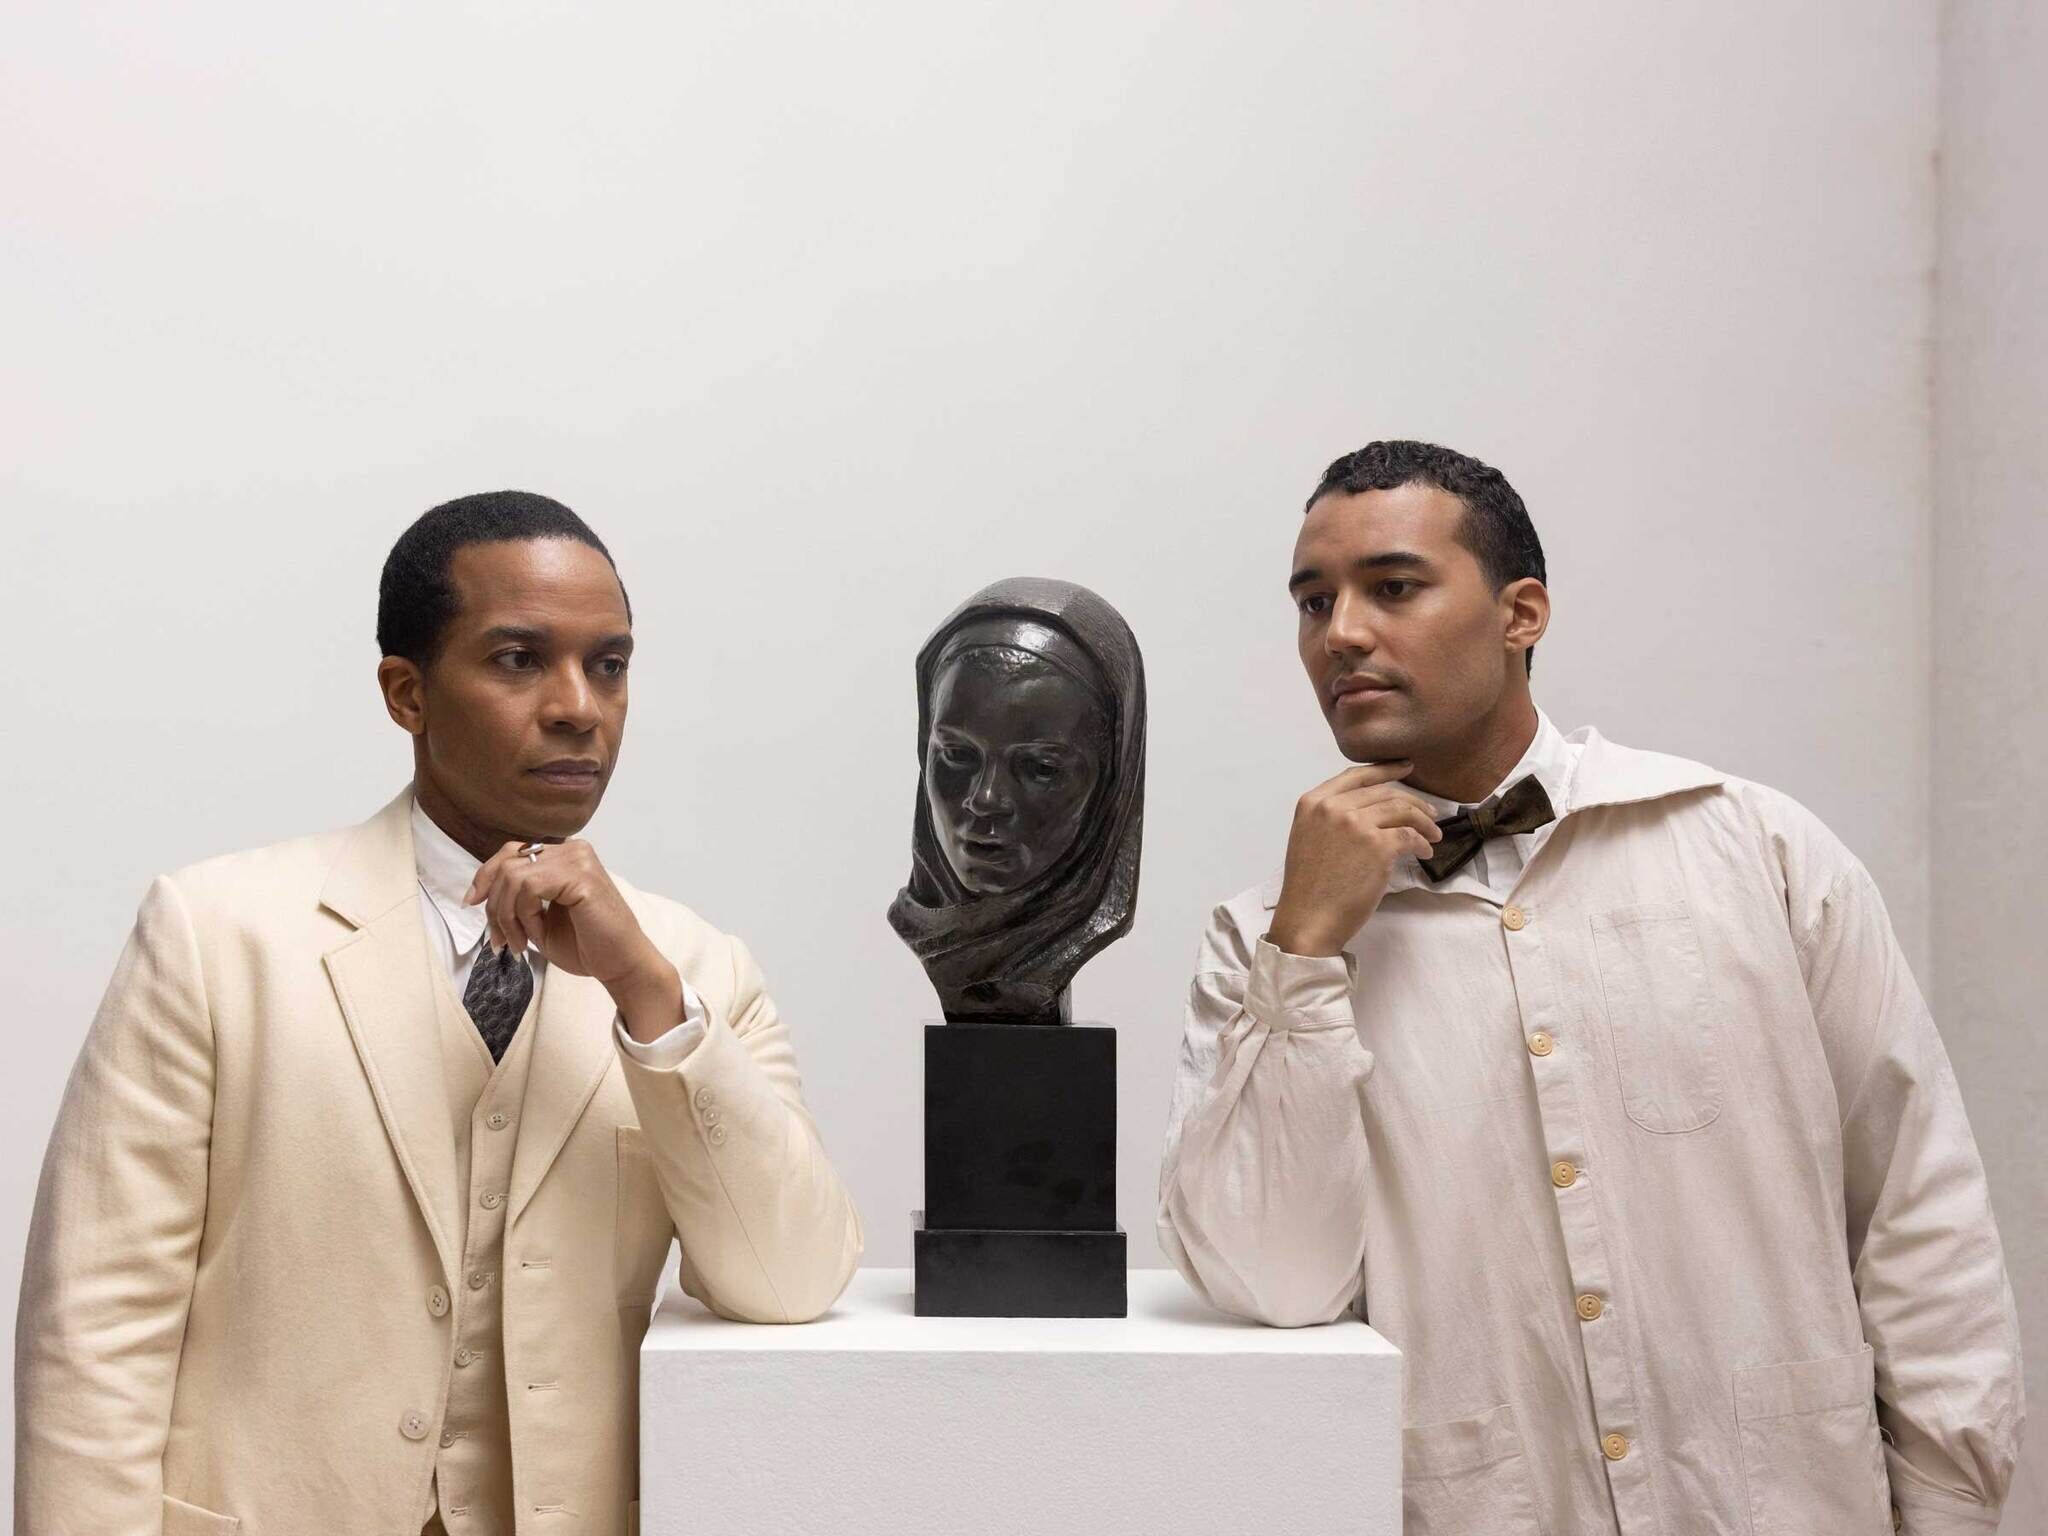 Two men in light suits posing thoughtfully beside a bust sculpture on a pedestal.